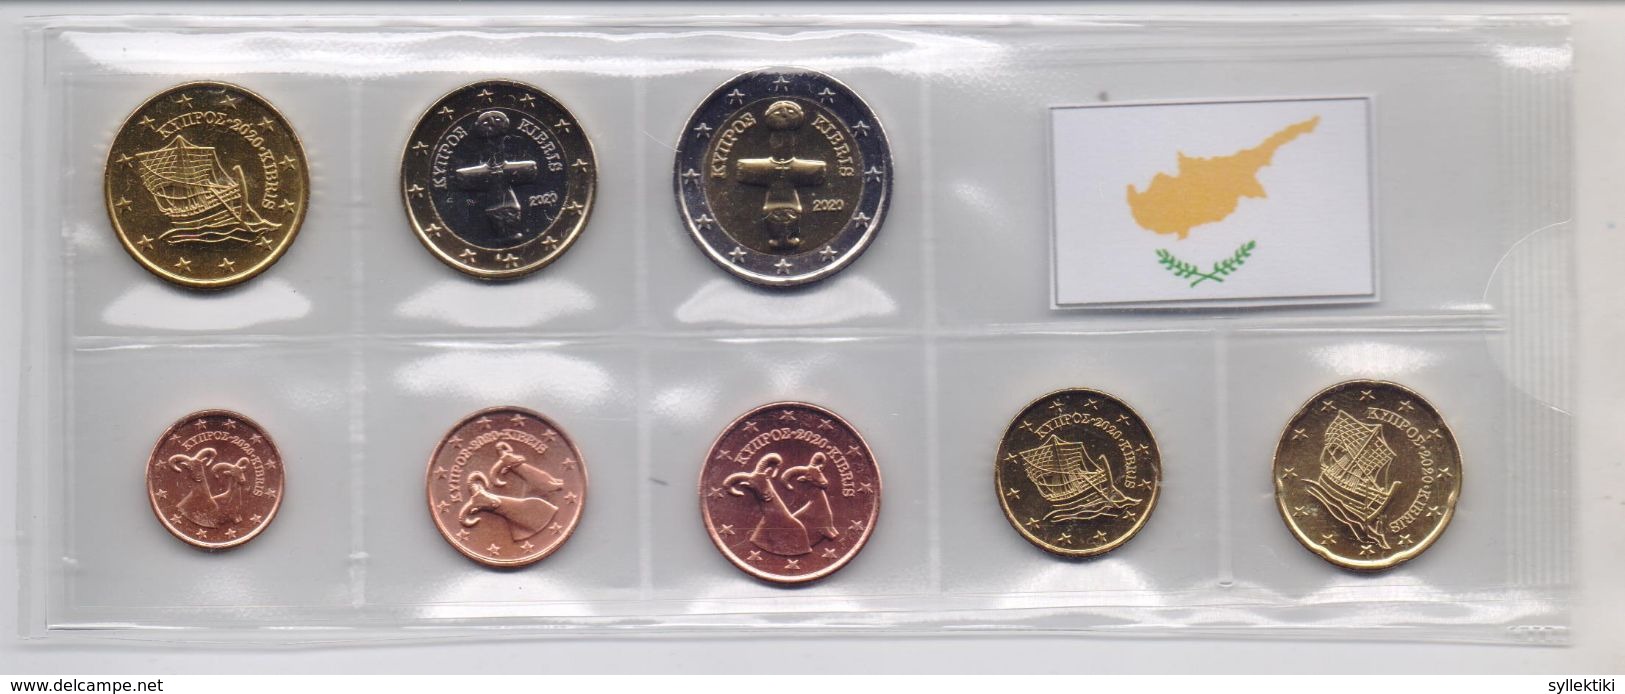 CYPRUS 2020 COMPLETE EURO COINS SET UNC - Cyprus